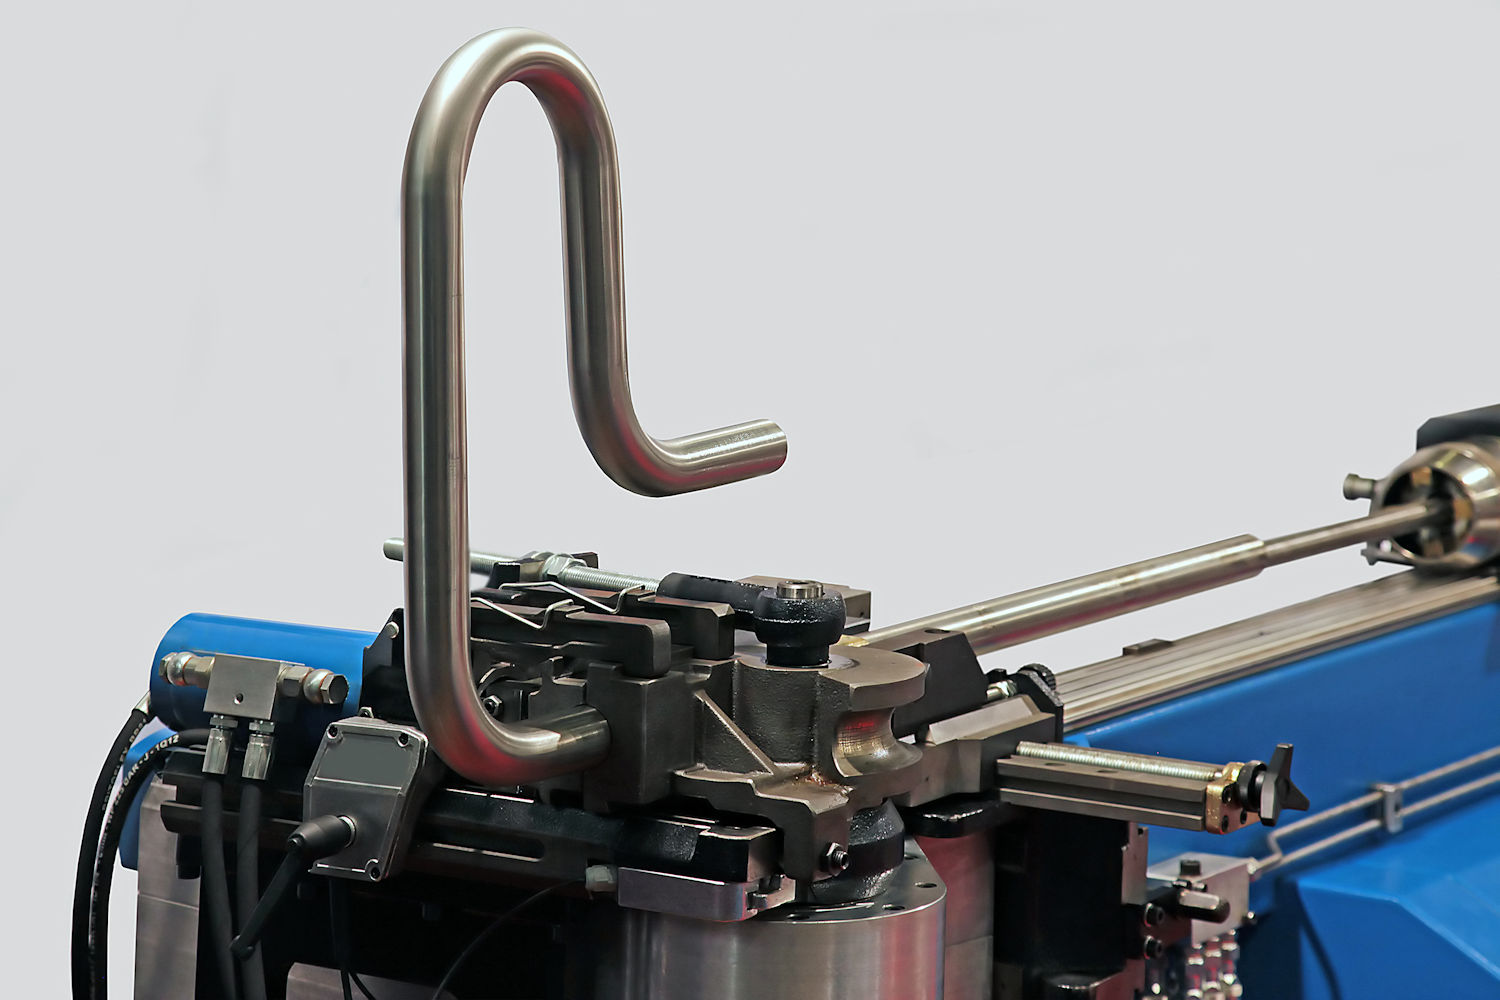 What problems should be paid attention to during the operation of pipe bending machine